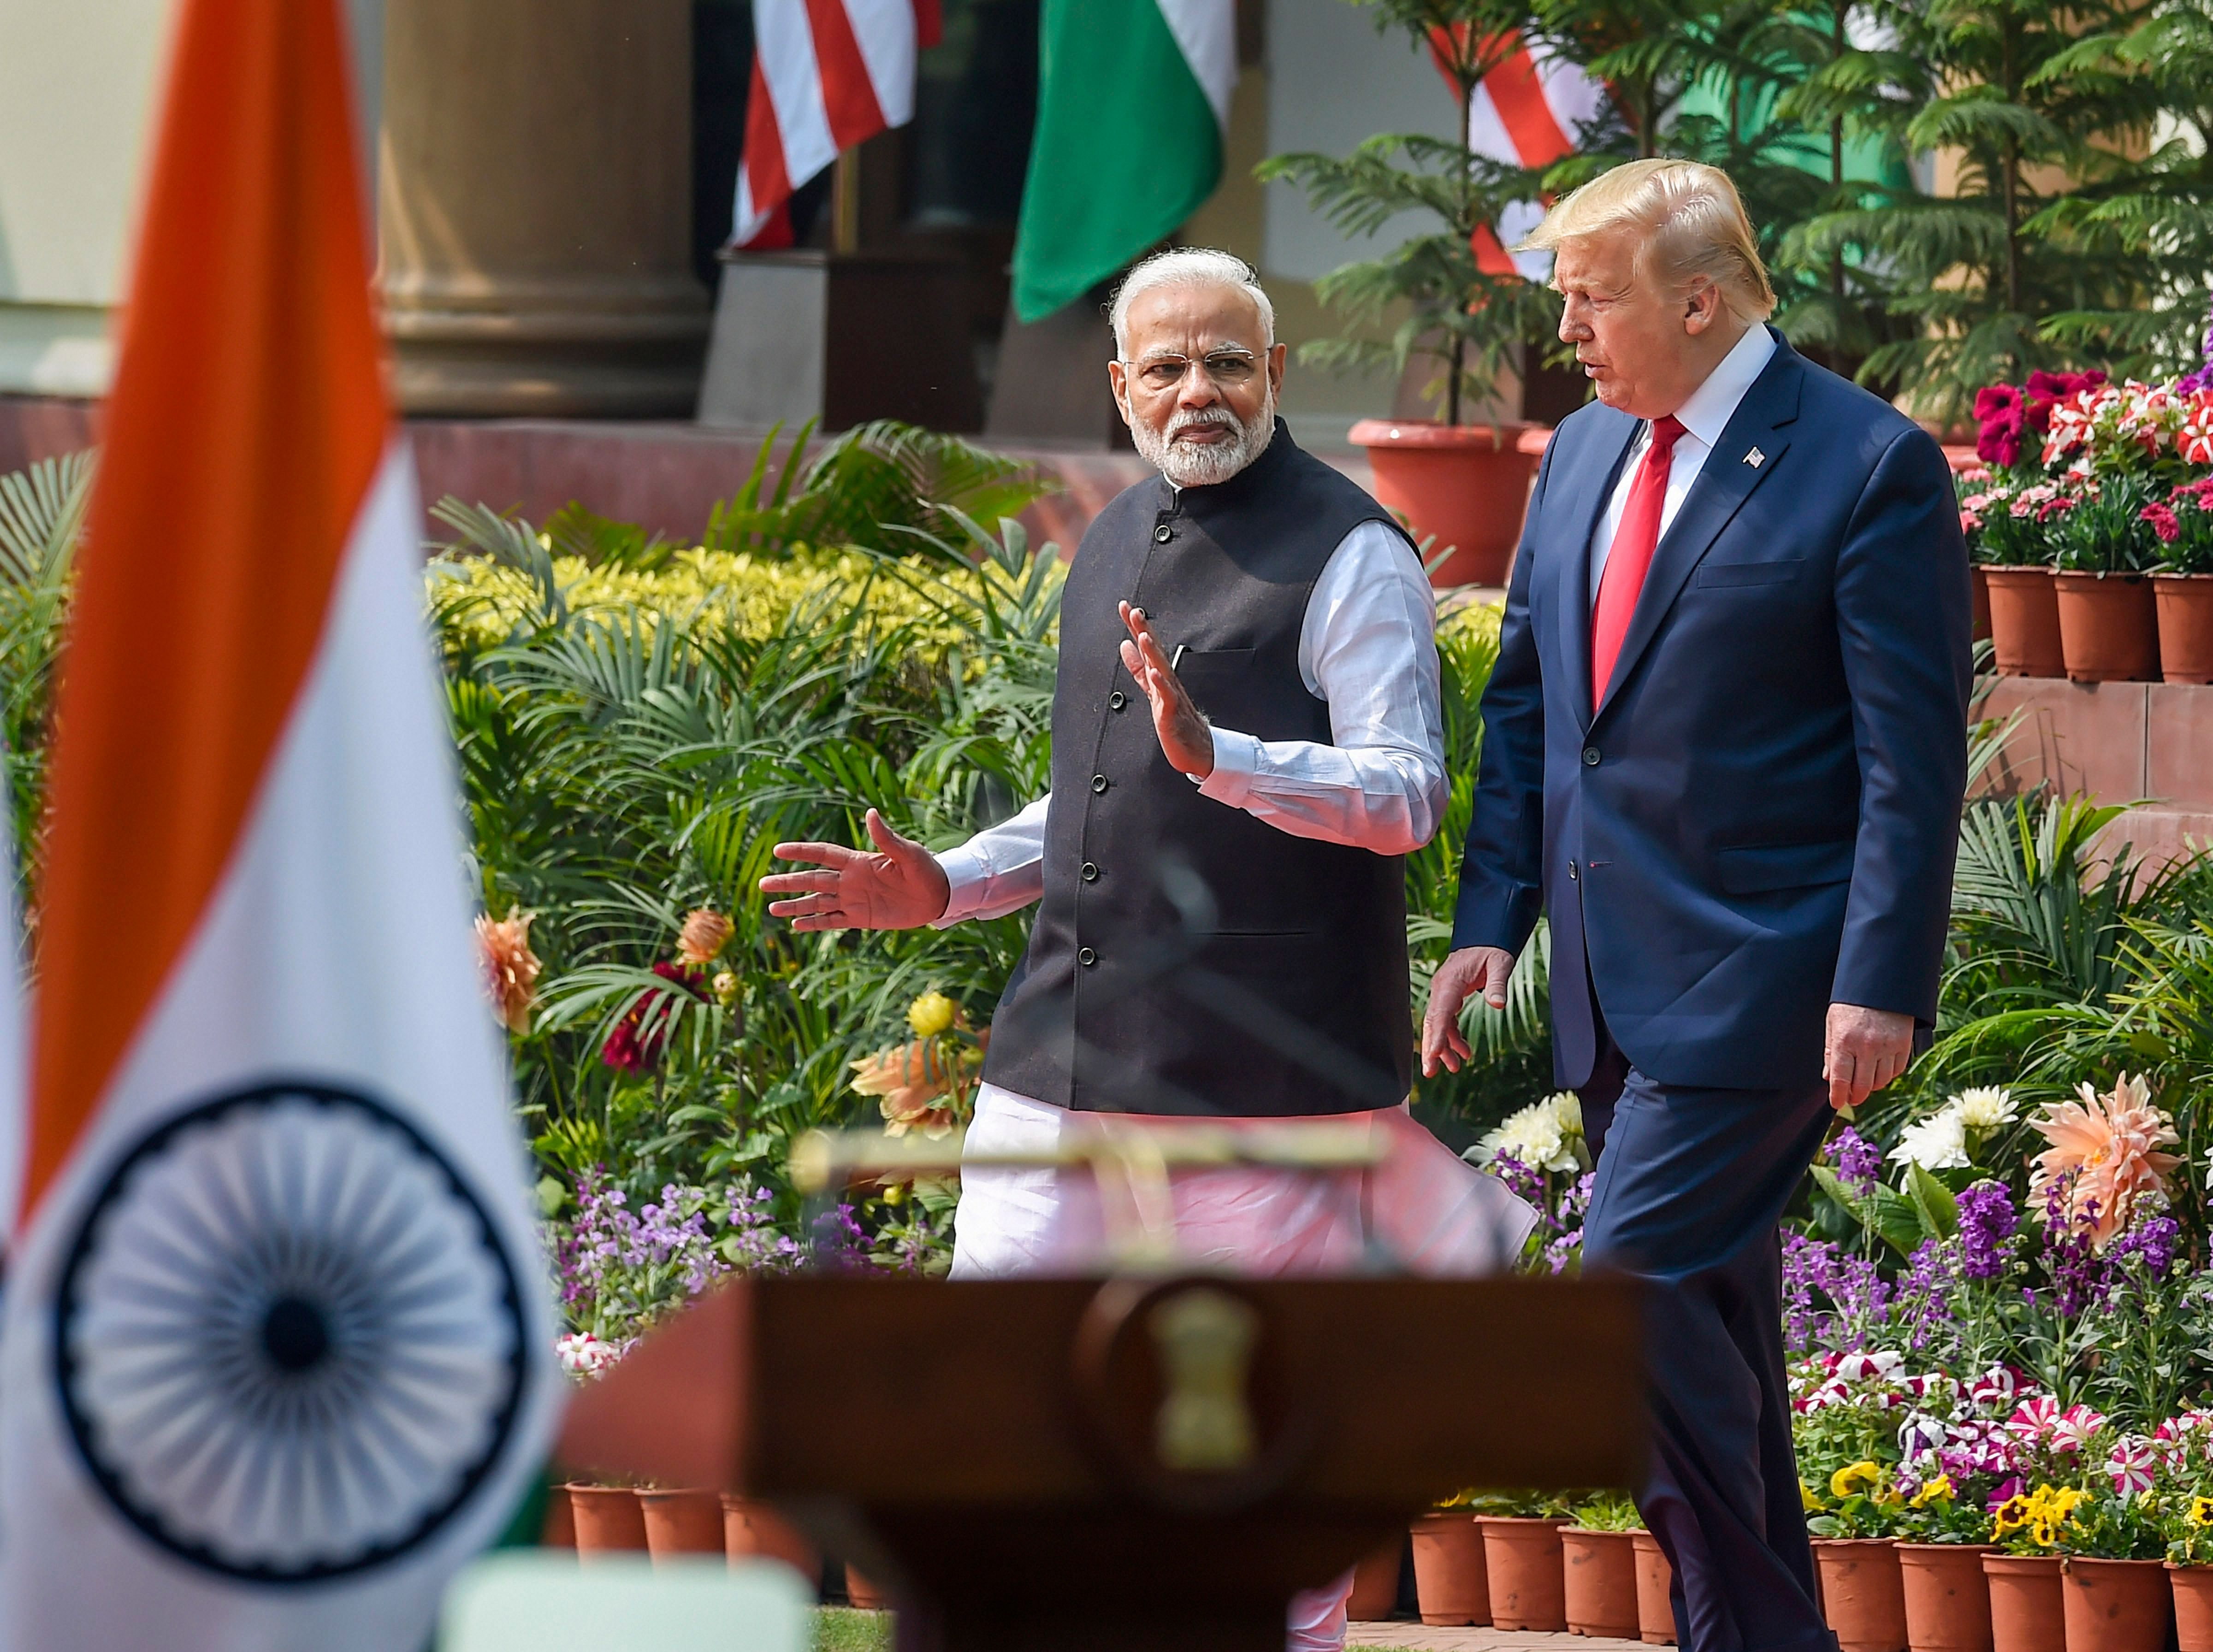 Prime Minister Narendra Modi (L) and US President Donald Trump arrive to address their joint press statement, at the Hyderabad House in New Delhi. (PTI Photo)